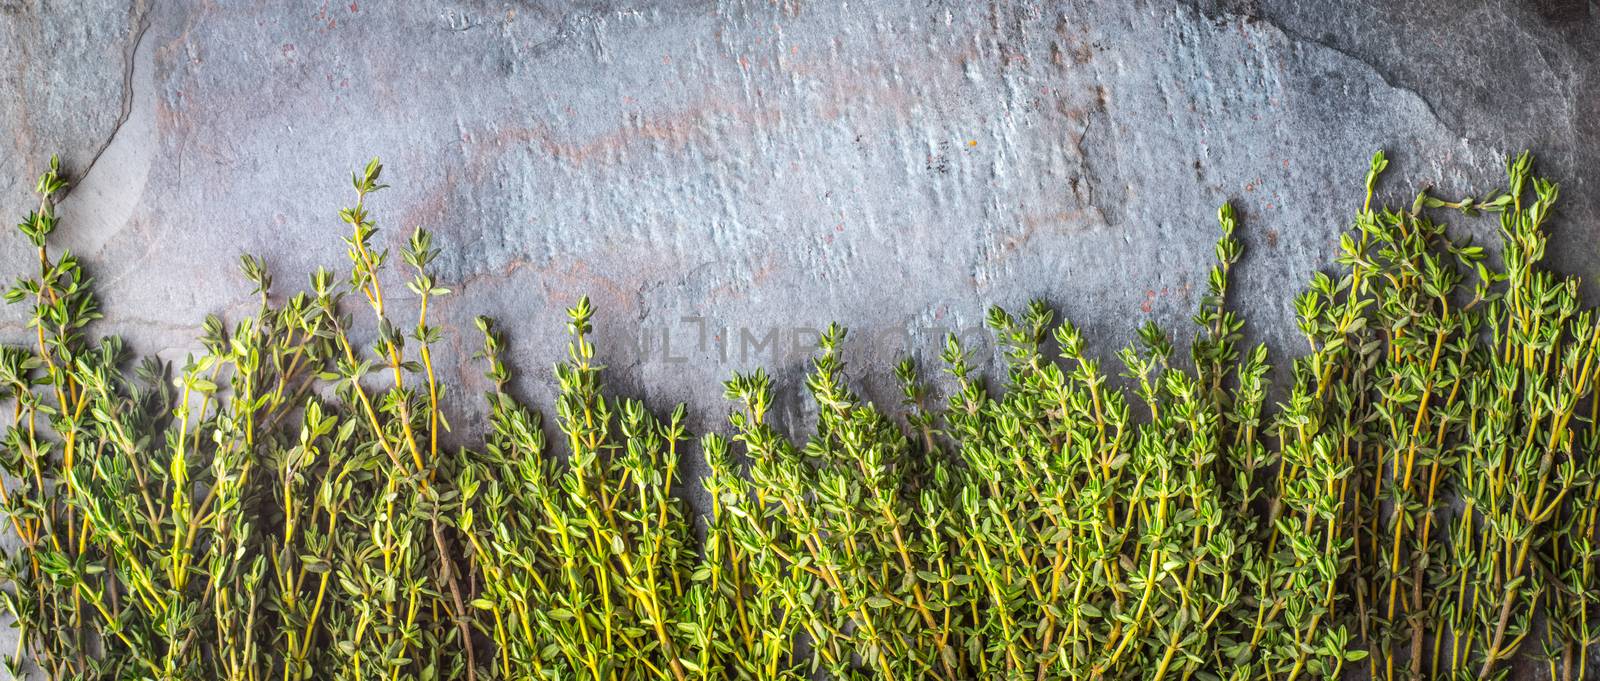 Thyme sprigs on the stone table wide screen by Deniskarpenkov